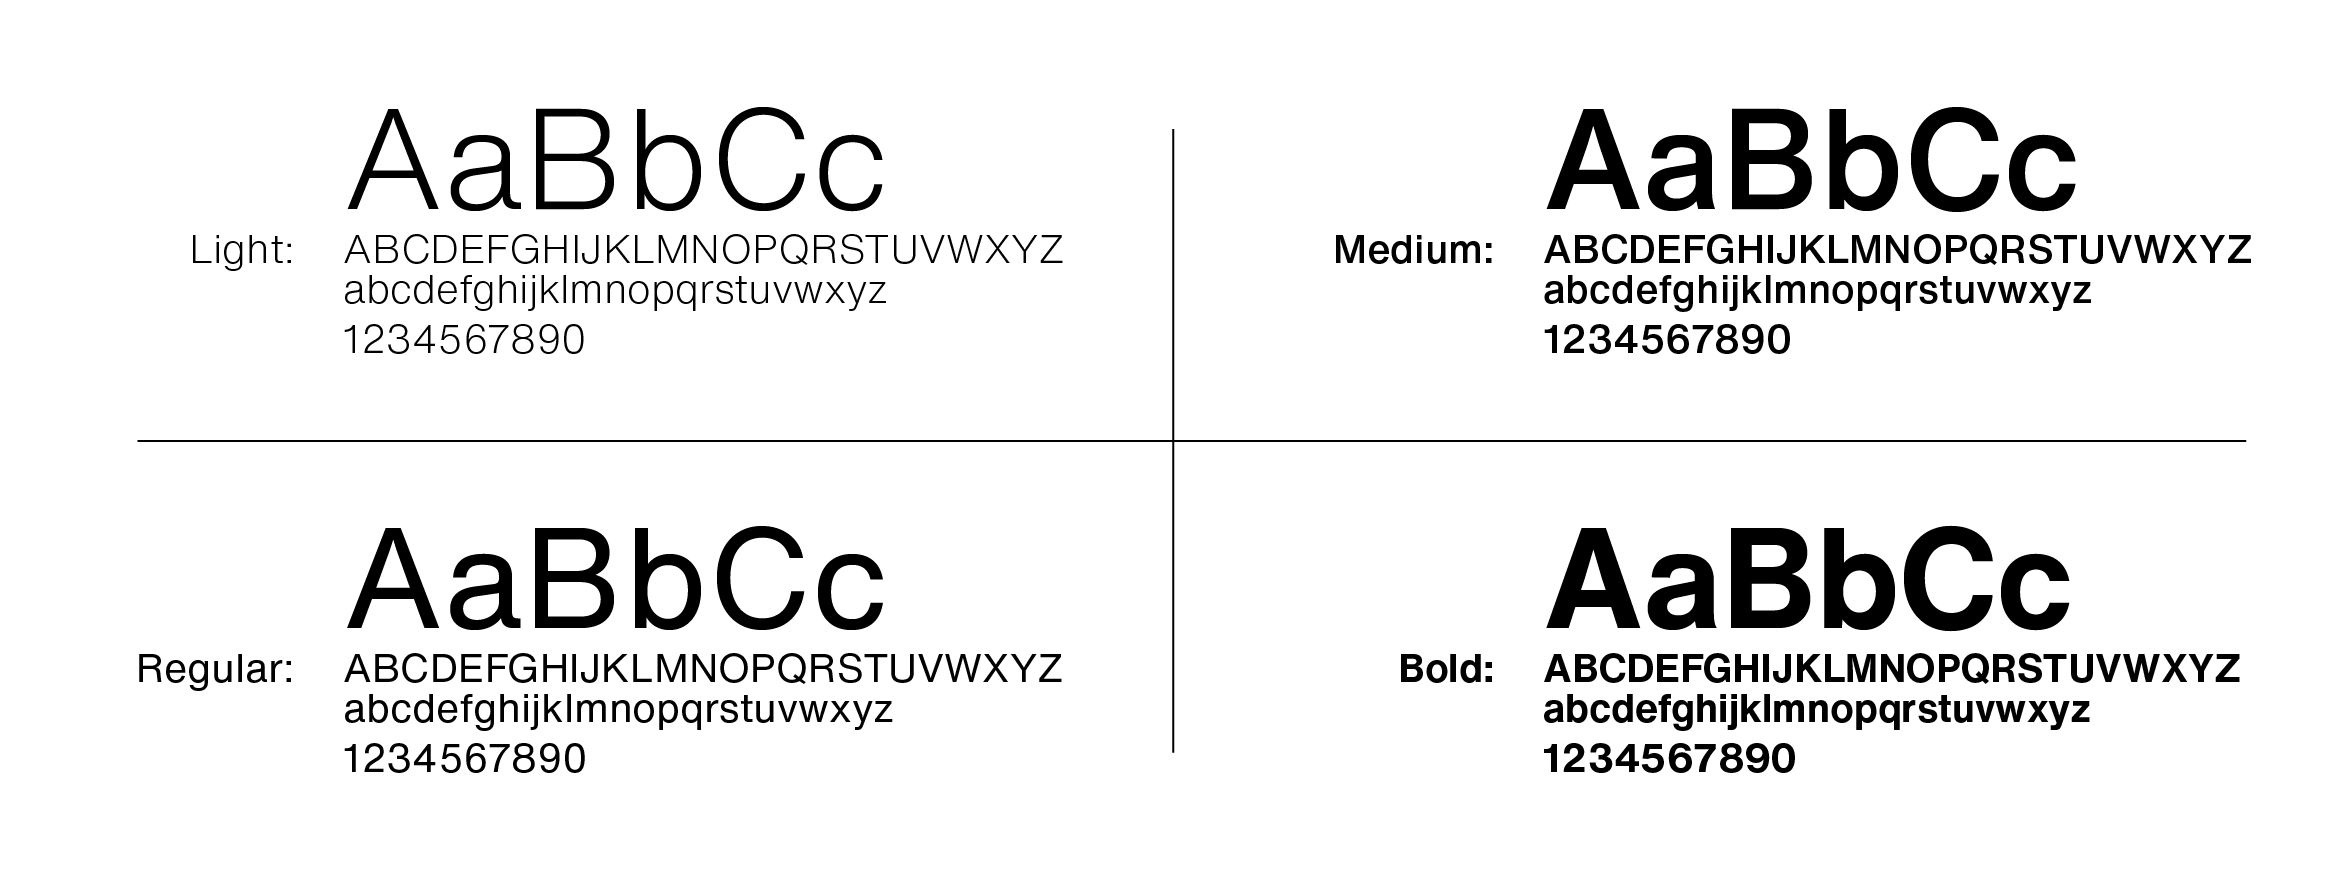 Sample text in various typeface weights